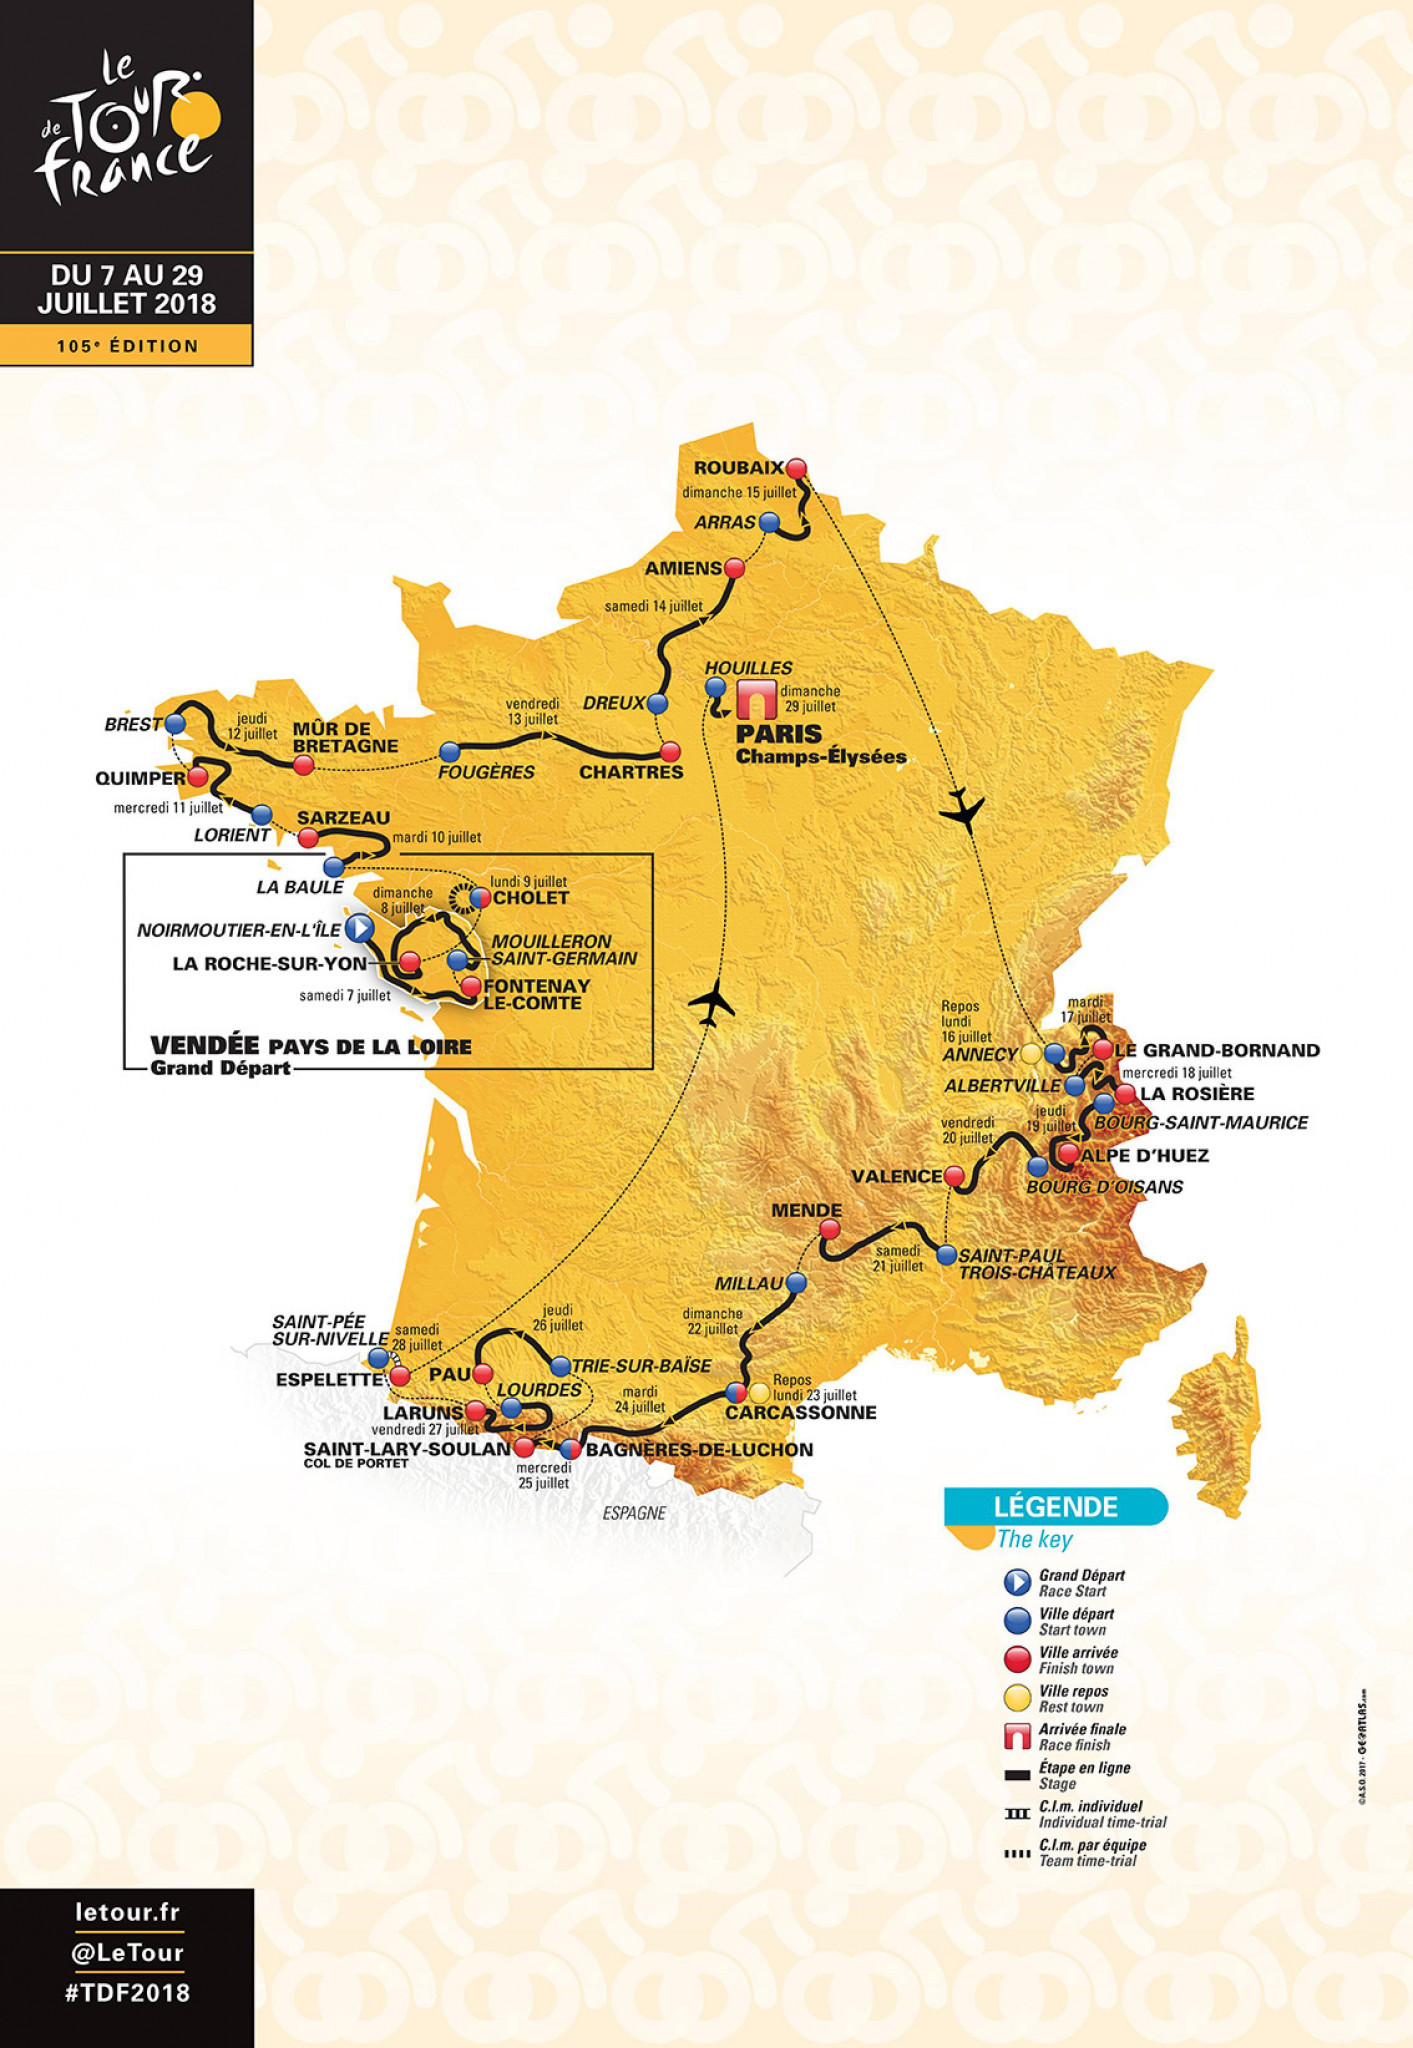 The Tour de France 2018 route has been unveiled by organisers ©TDF